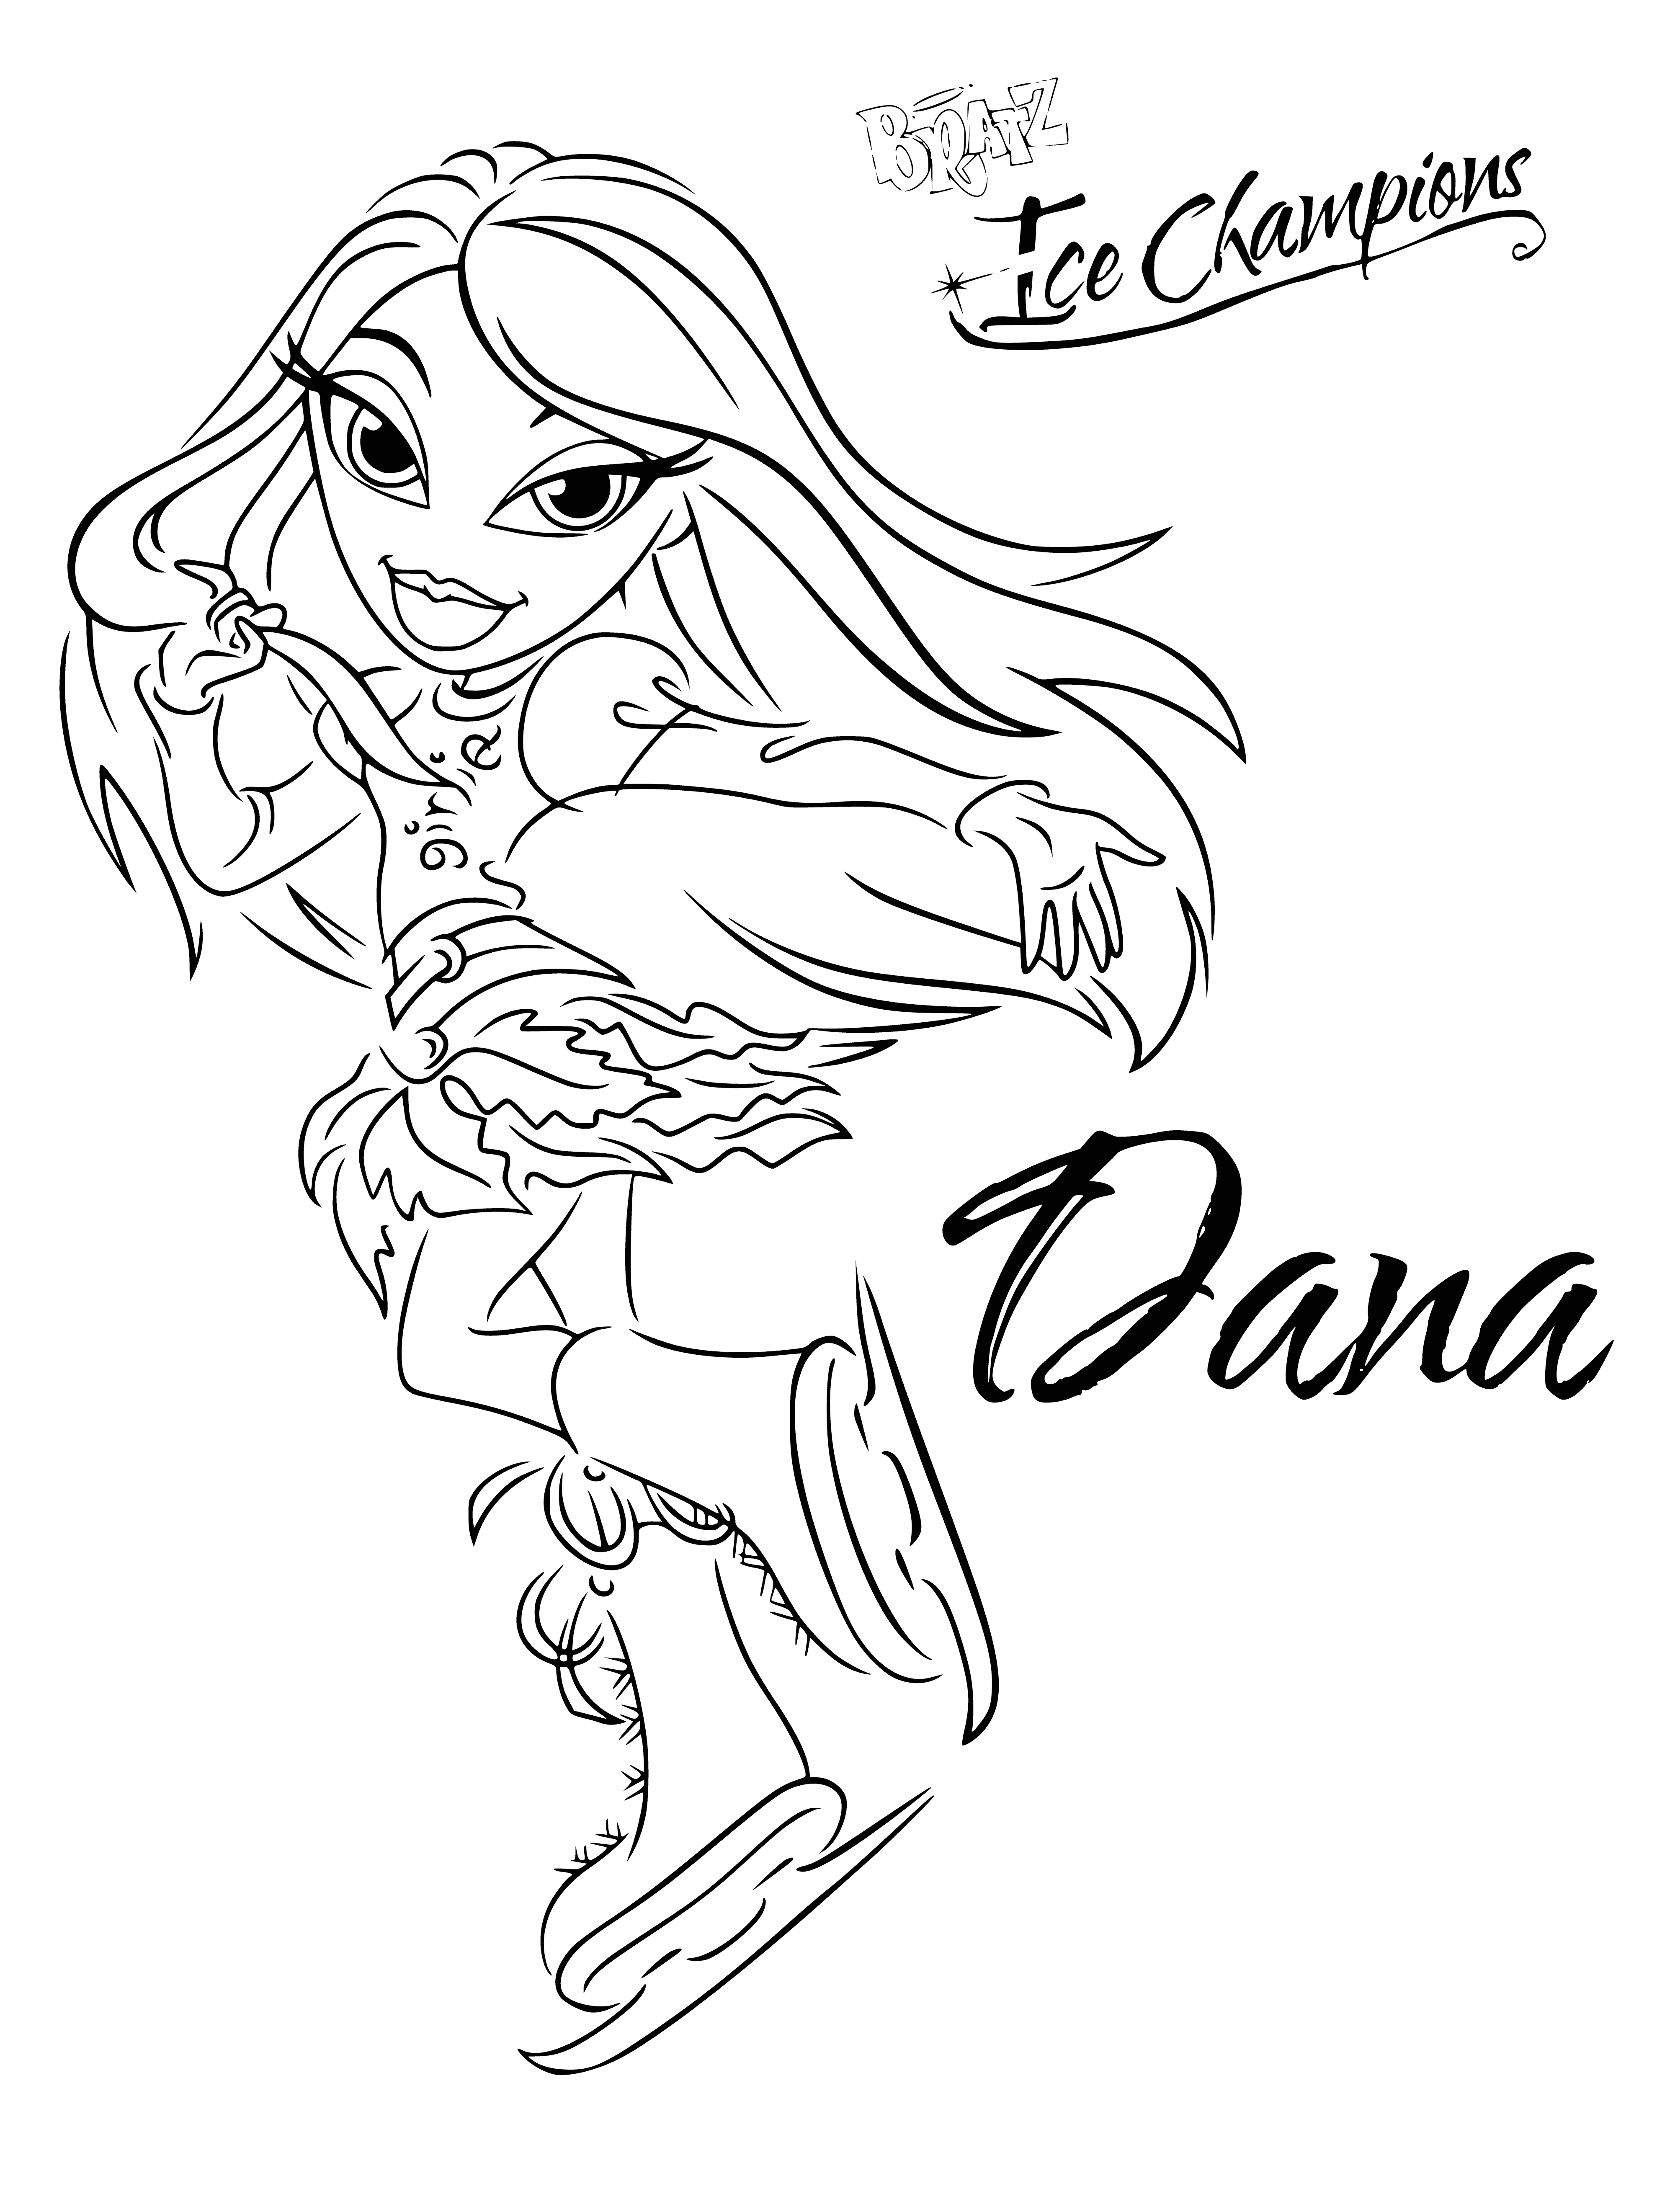 Brother Dana coloring page